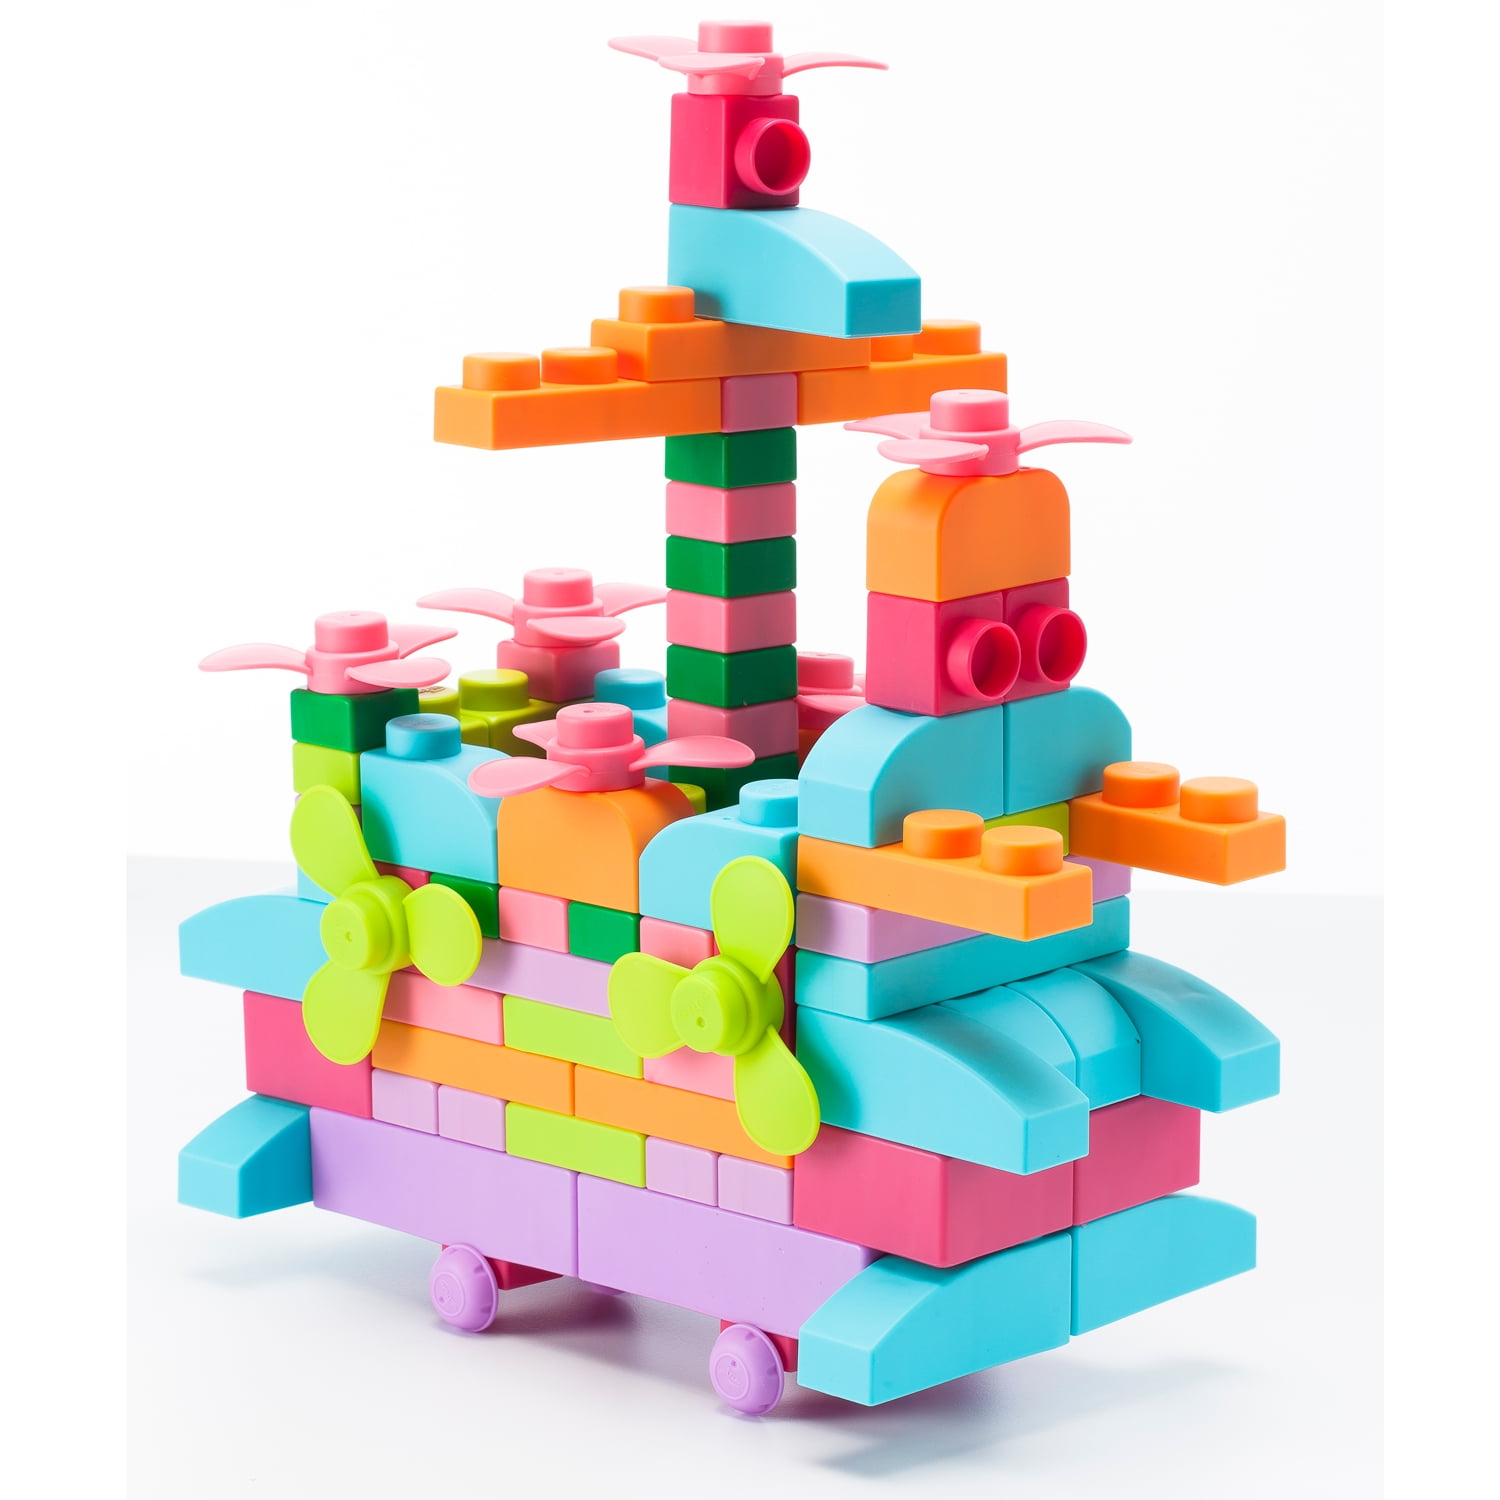 YISOOPEI 32pcs Stacking Toys Balance Building Blocks, Blocks for Kids Ages  4-8, 2 Player Games for Family Games for Kids and Adults,Travel Games